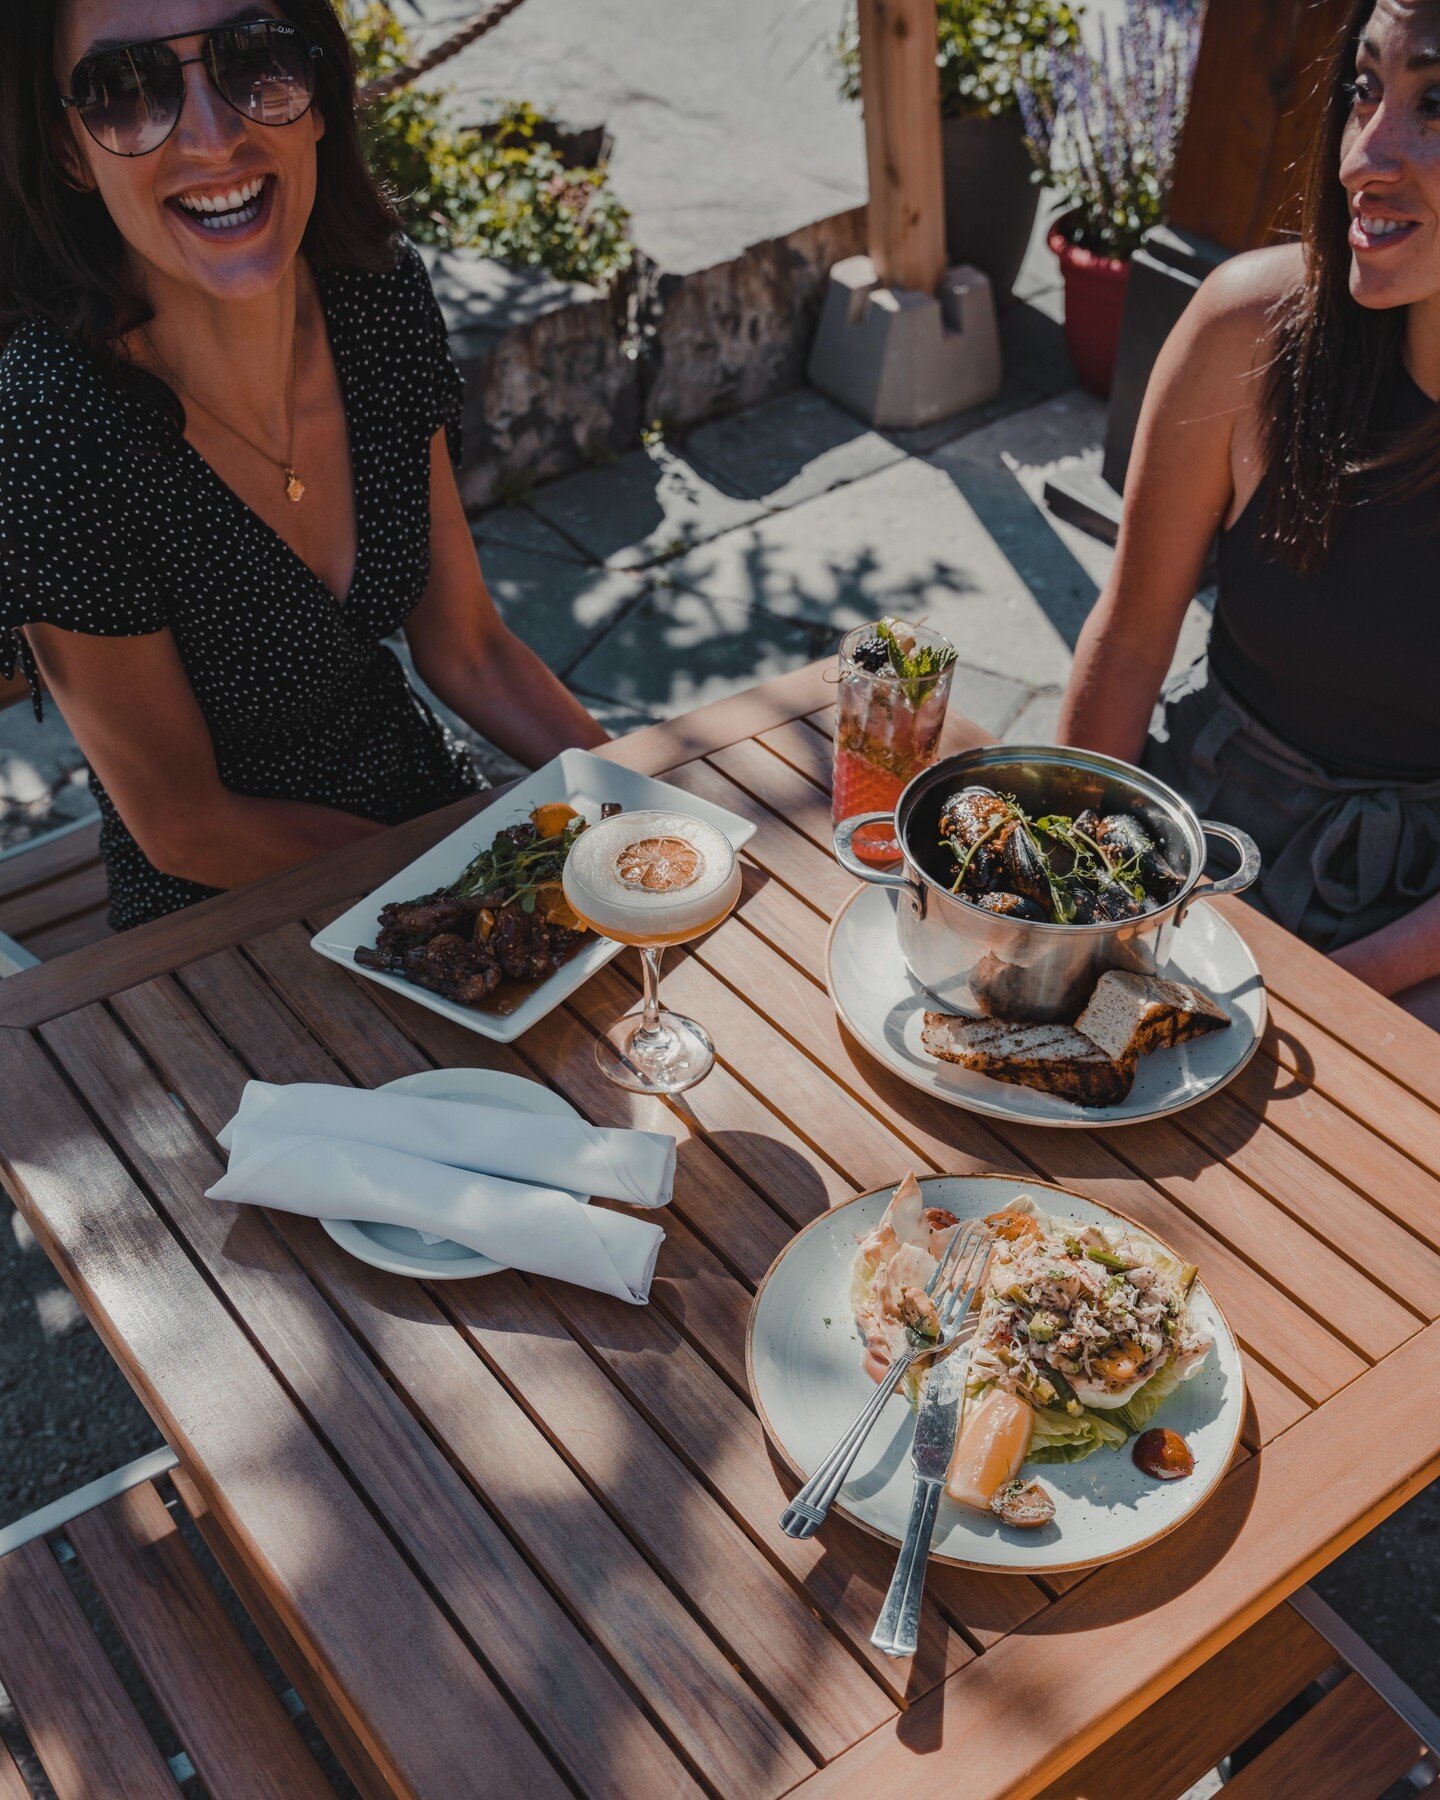 Dine in the heart of Banff and enjoy delicious cuts, beautiful weather and great vibes. Make your brunch, lunch and dinner reservations now and enjoy a meal to remember on our streetside patio.

#banff #mybanff #themapleleaf #mapleleaf